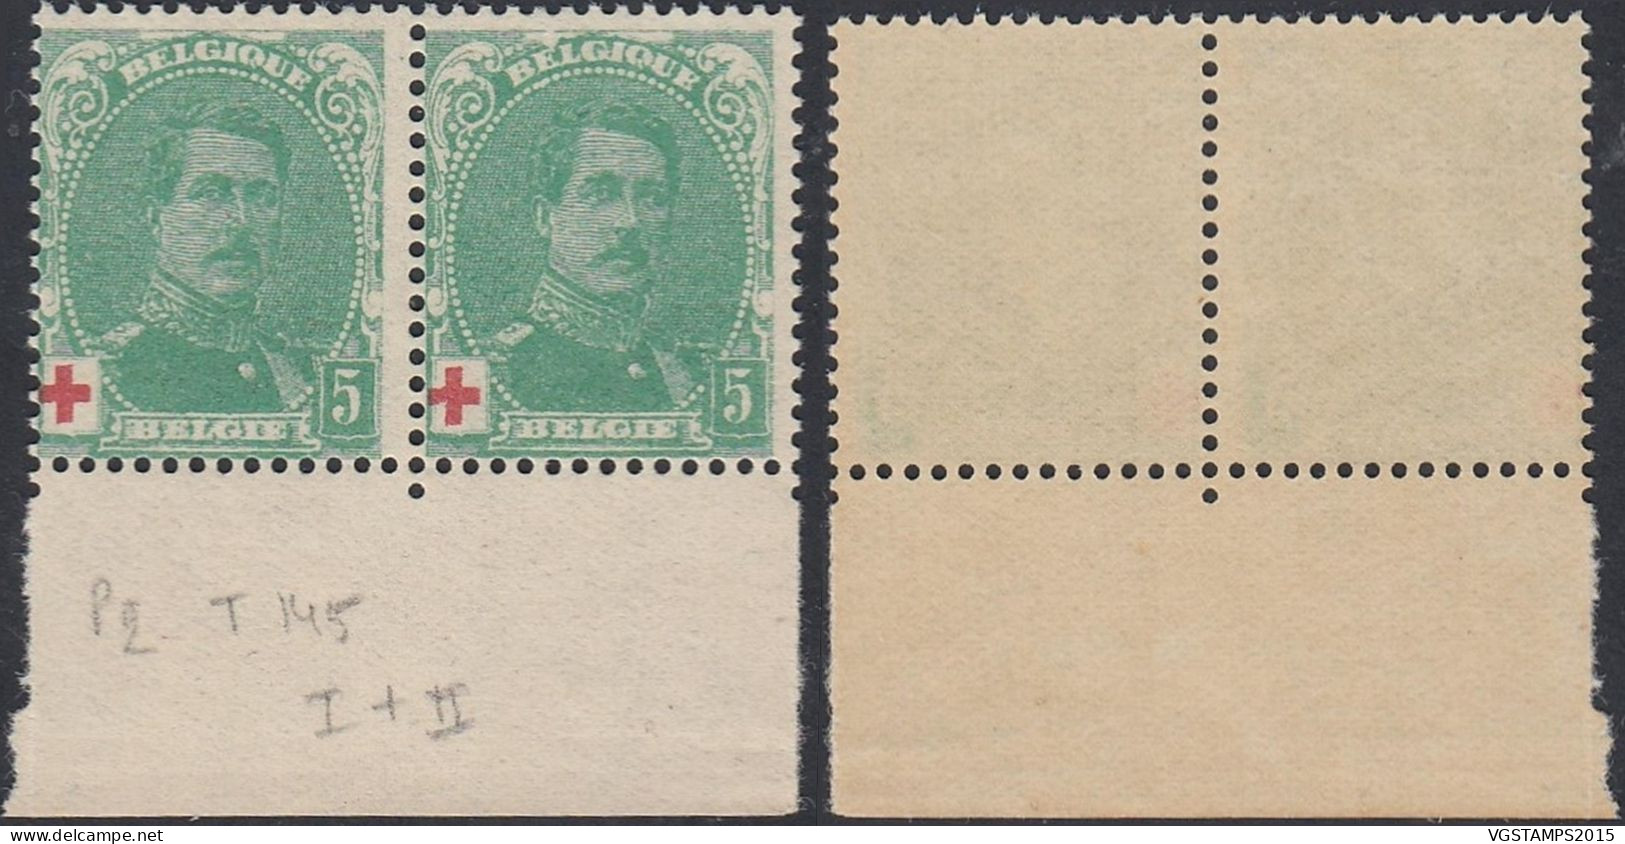 Belgique 1914 - Timbres Neufs. COB Nr.: 129 .Type I + II Se Tenant Planche 2 . Tirage 145. A Paire. (EB) AR-02062 - 1914-1915 Red Cross